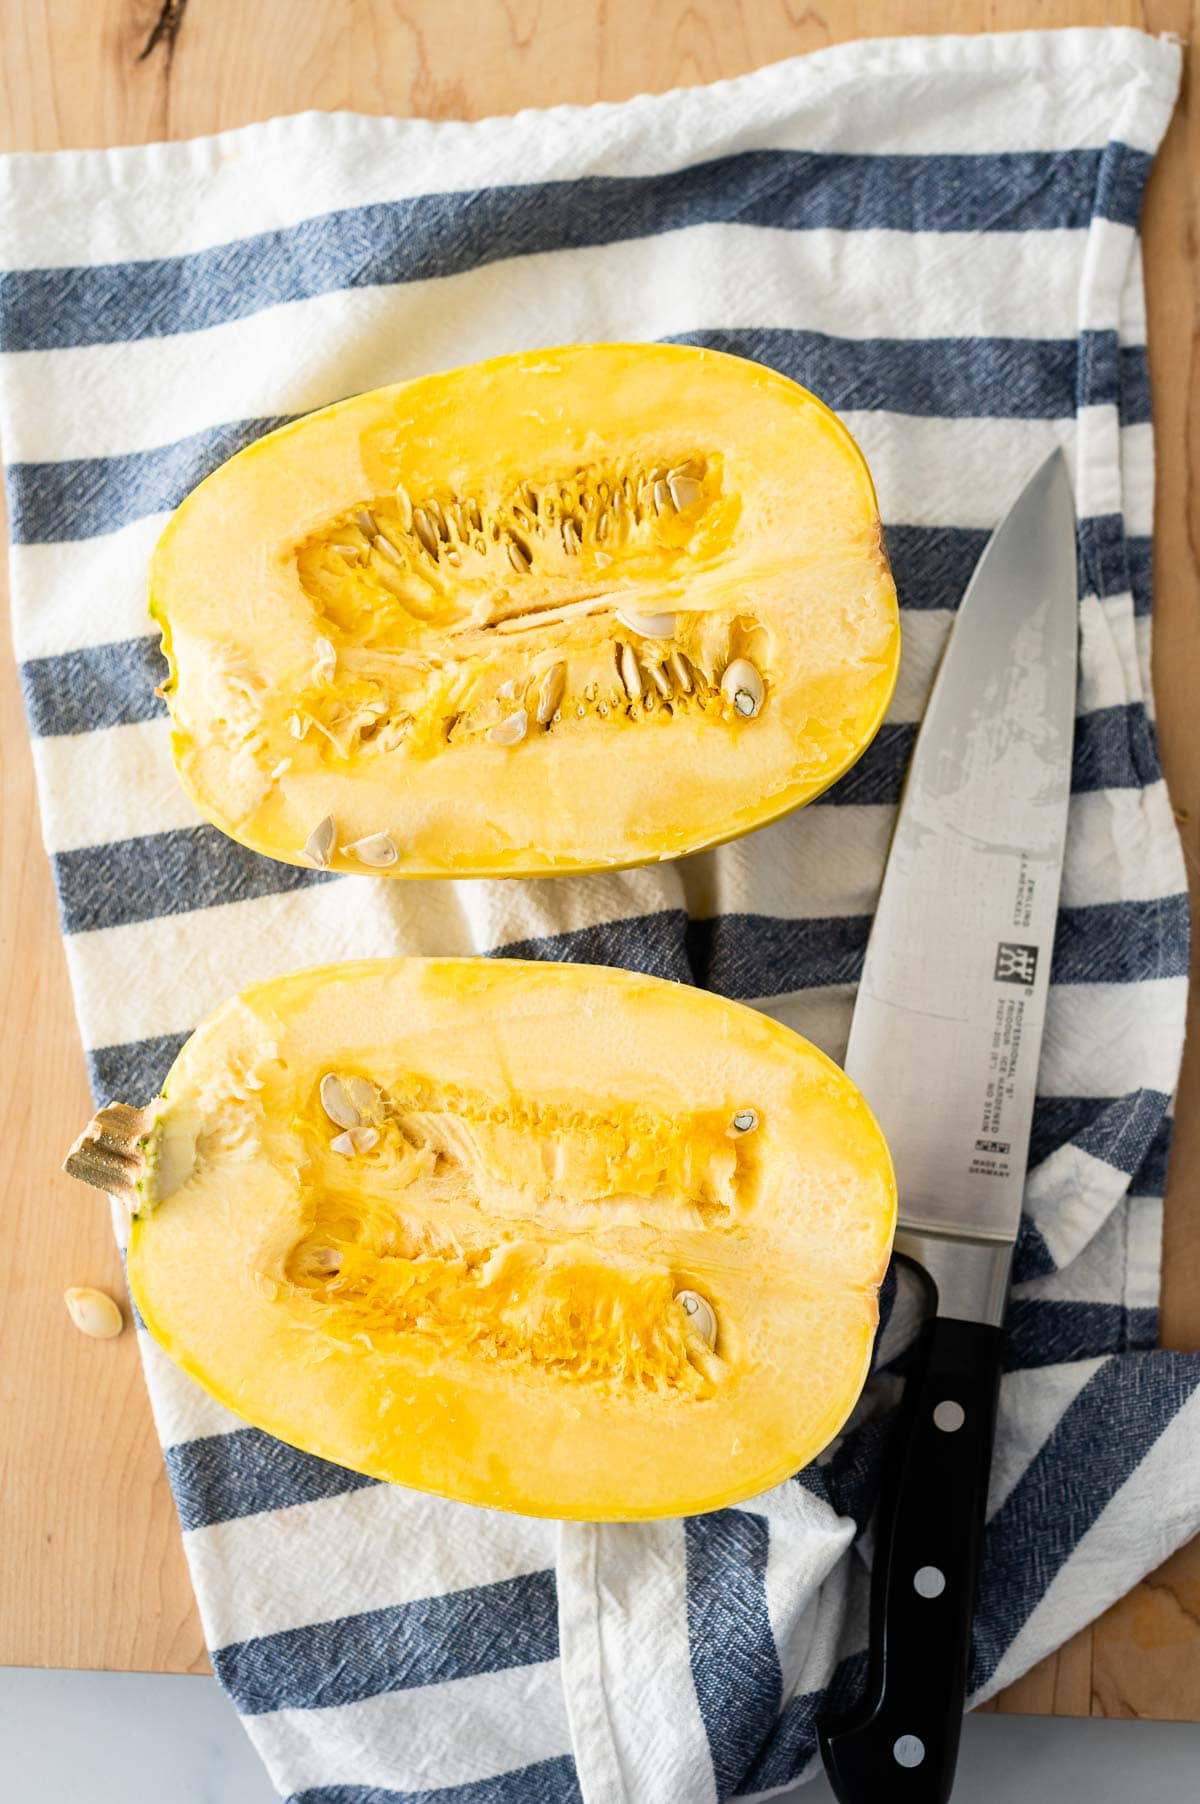 Two spaghetti squash halves on a cutting board with a knife and towel.